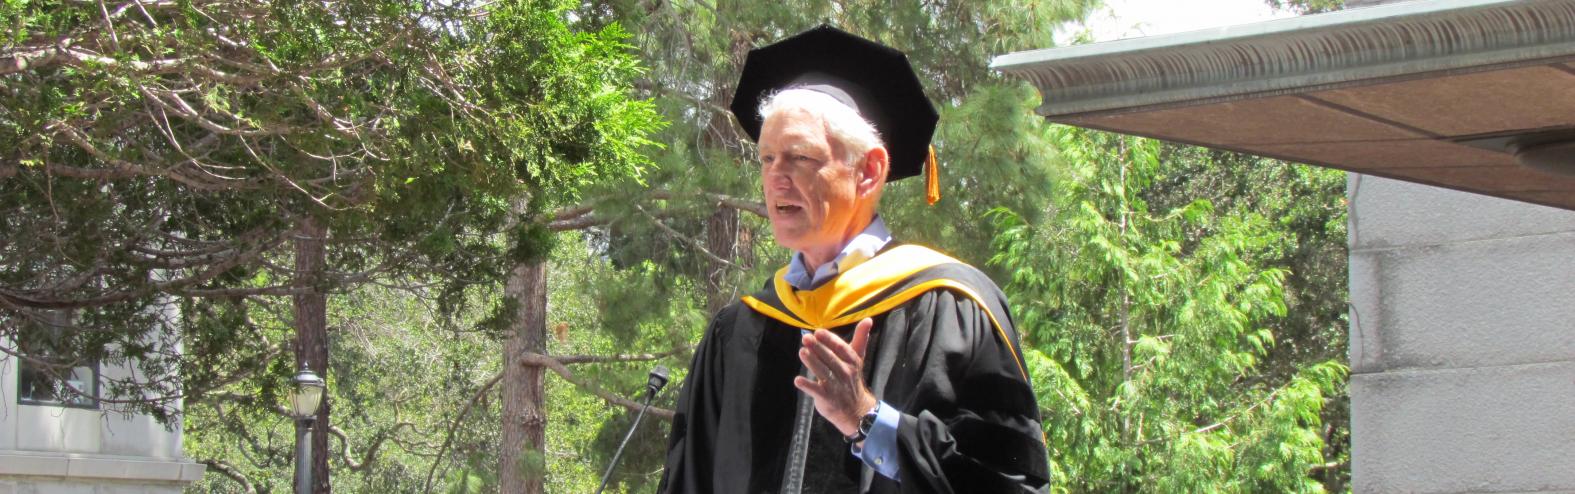 The 2016 commencement keynote speaker was Peter Norvig, Google’s director of research